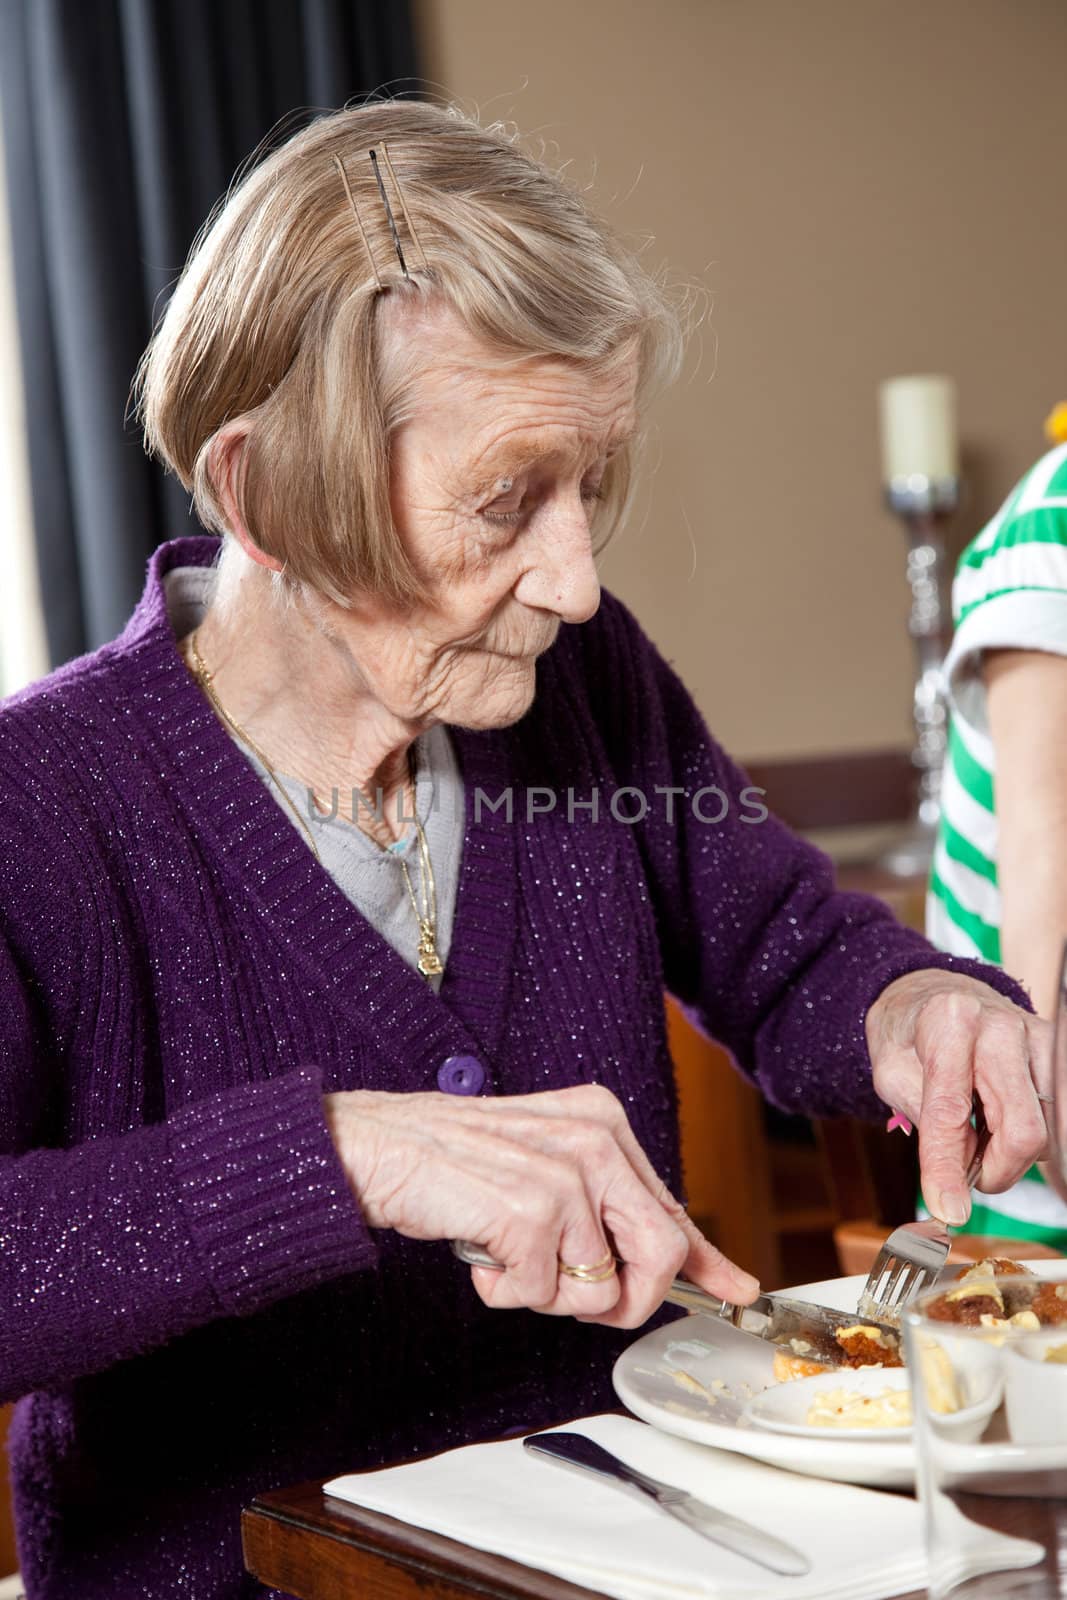 Lady of 80 years old having lunch in a restaurant